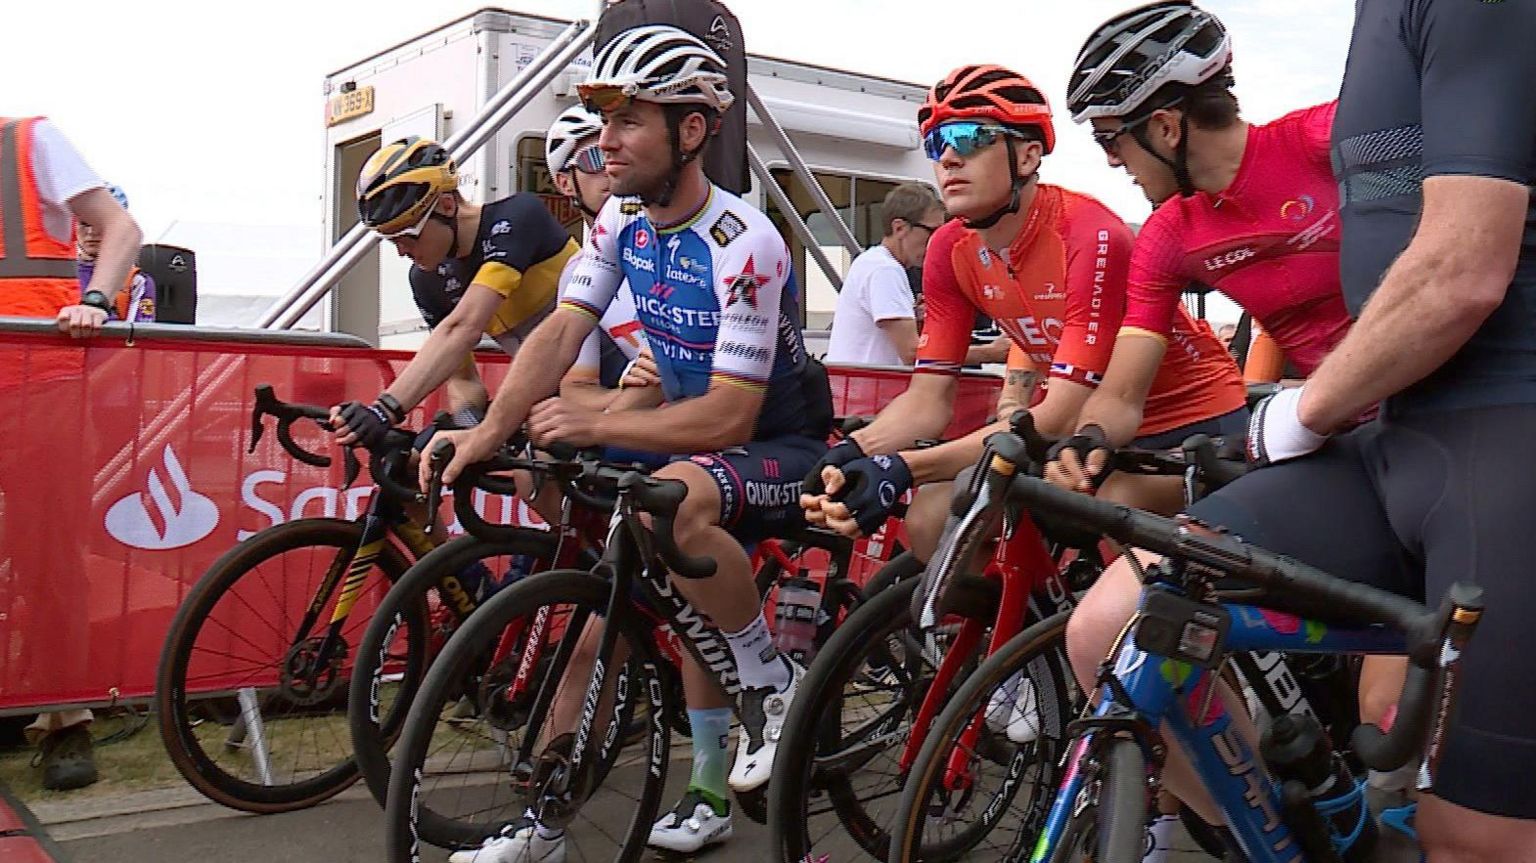 Six cyclists on bicycles at the start line of a race, wearing multicoloured lycra outfits and helmets line up at the beginning of a race. Mark Cavendish is in the middle wearing blue and white.